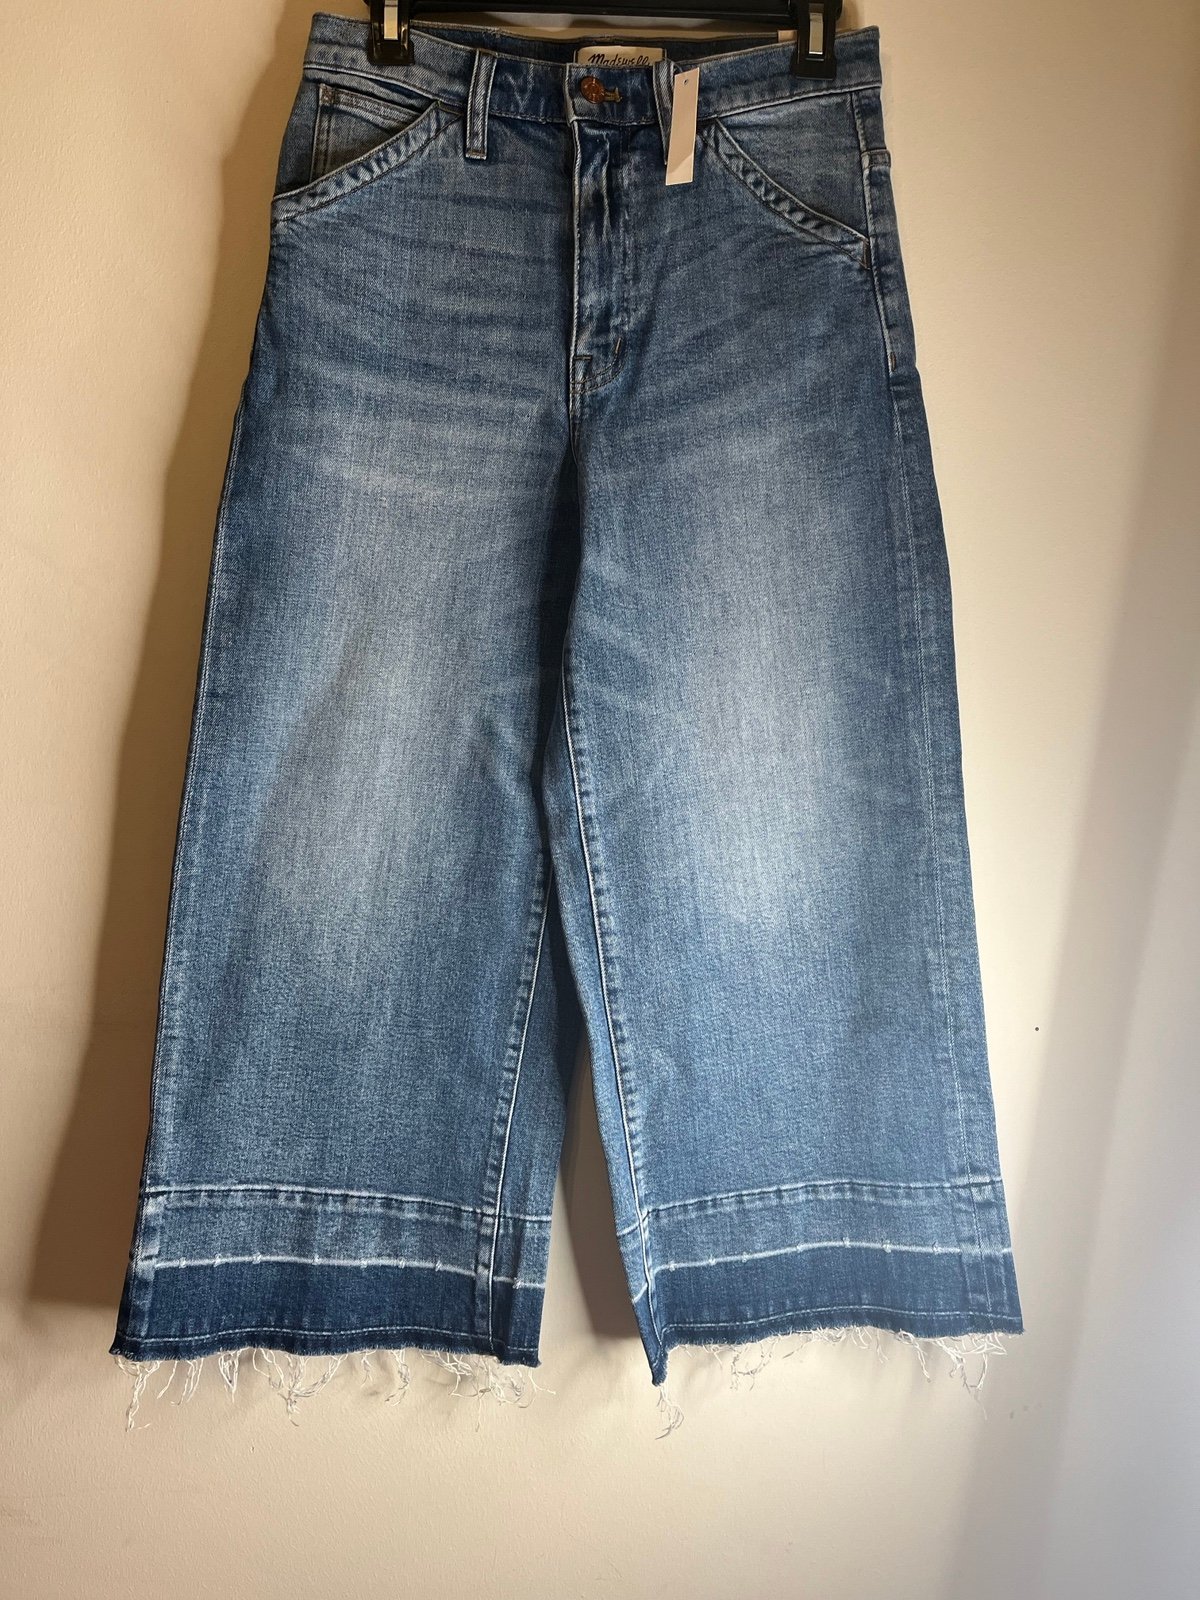 cheapest place to buy  Madewell crop jeans G1rwkrRrN on